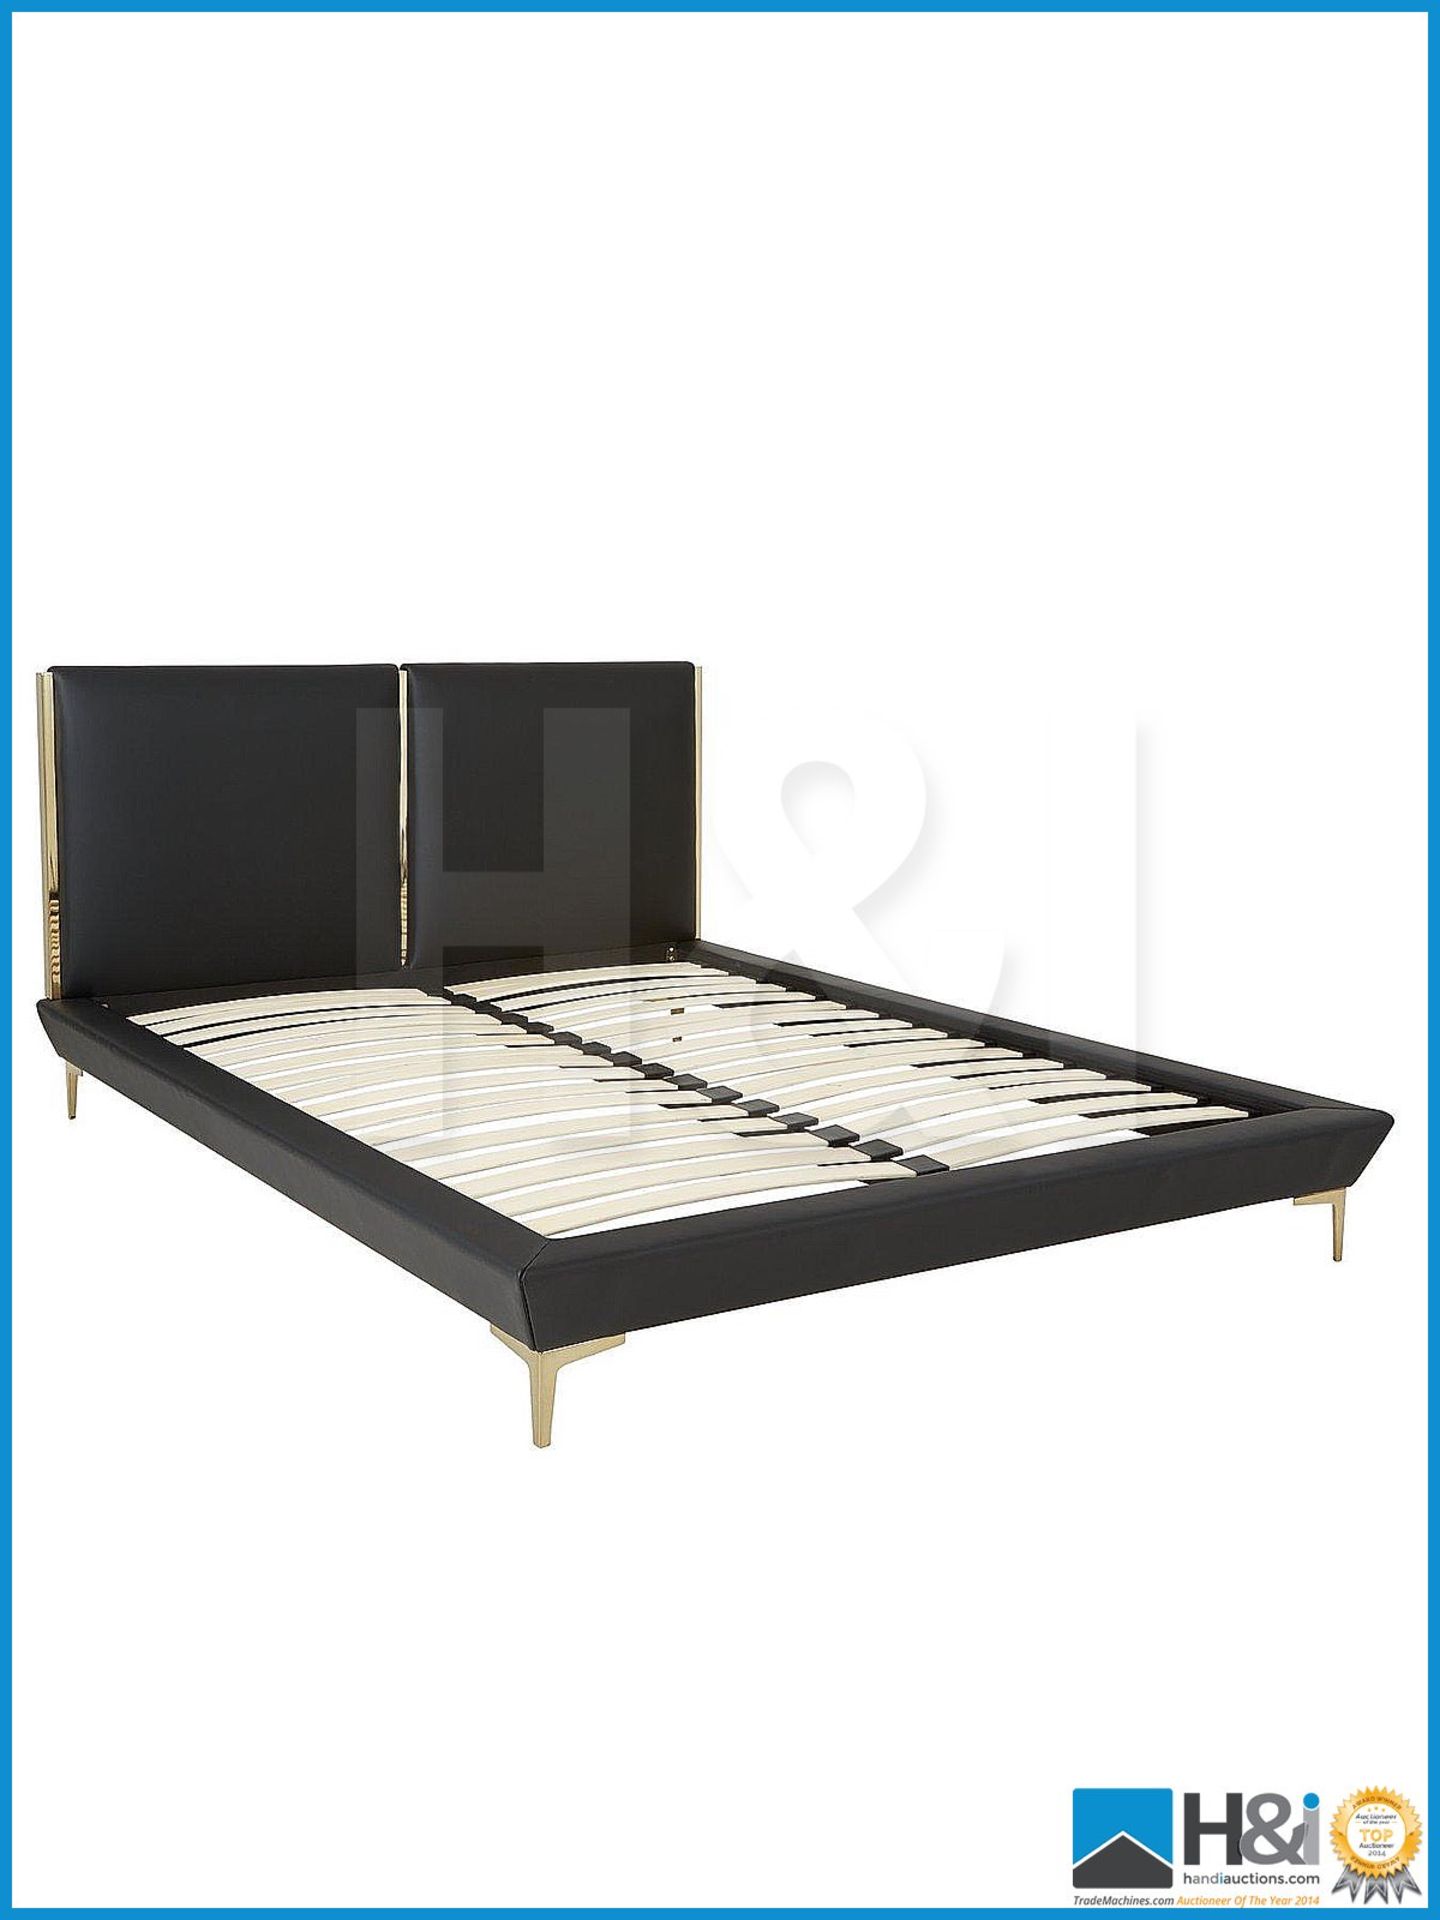 NEW IN BOX IDEAL HOME AURA DOUBLE BED [BLACK/GOLD] RRP GBP 599